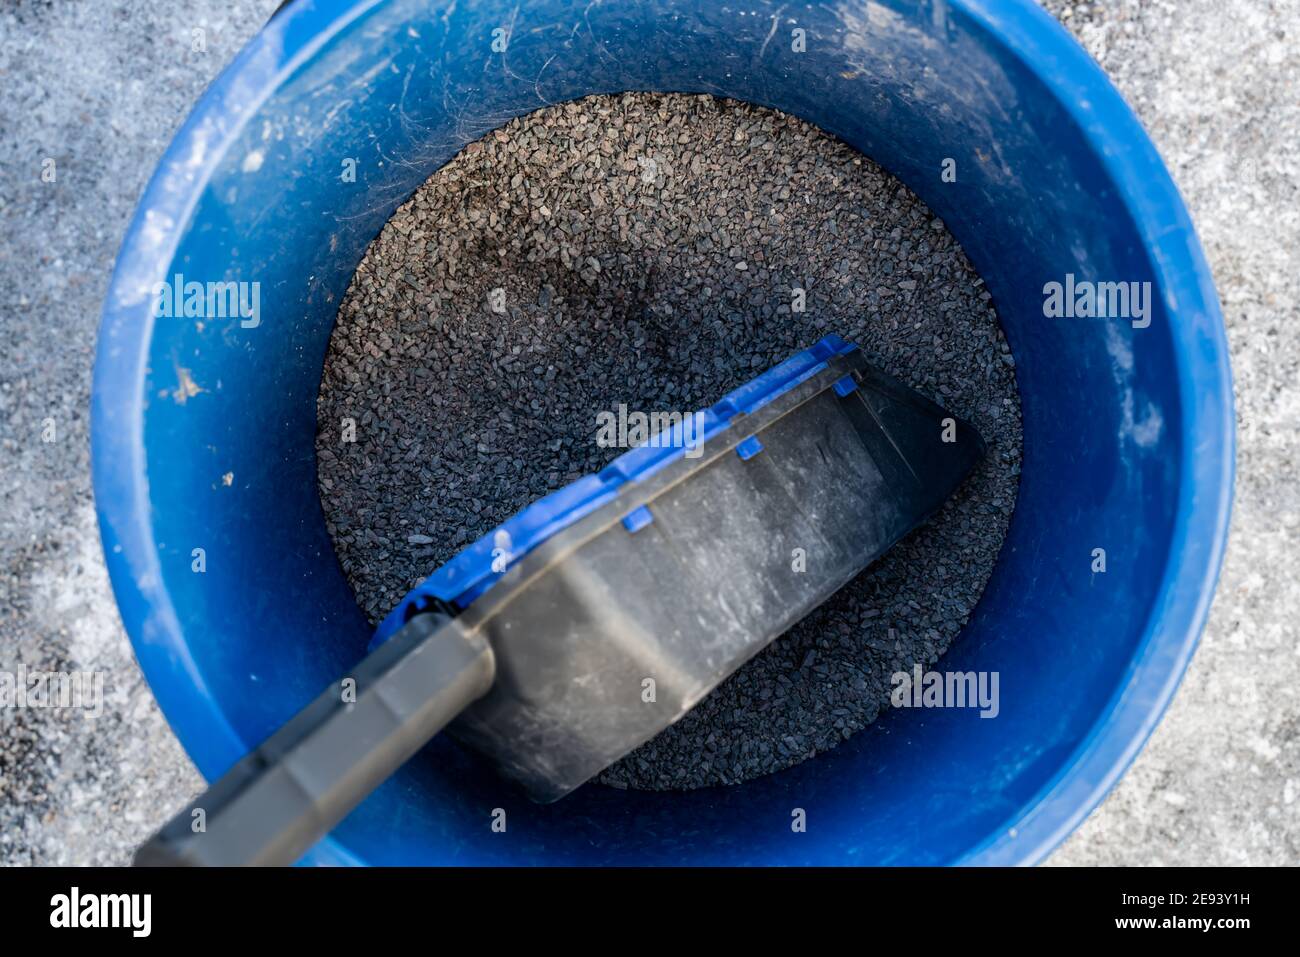 Blue bucket with gravel for icy roads and sidewalks. Shallow field of view. Stock Photo